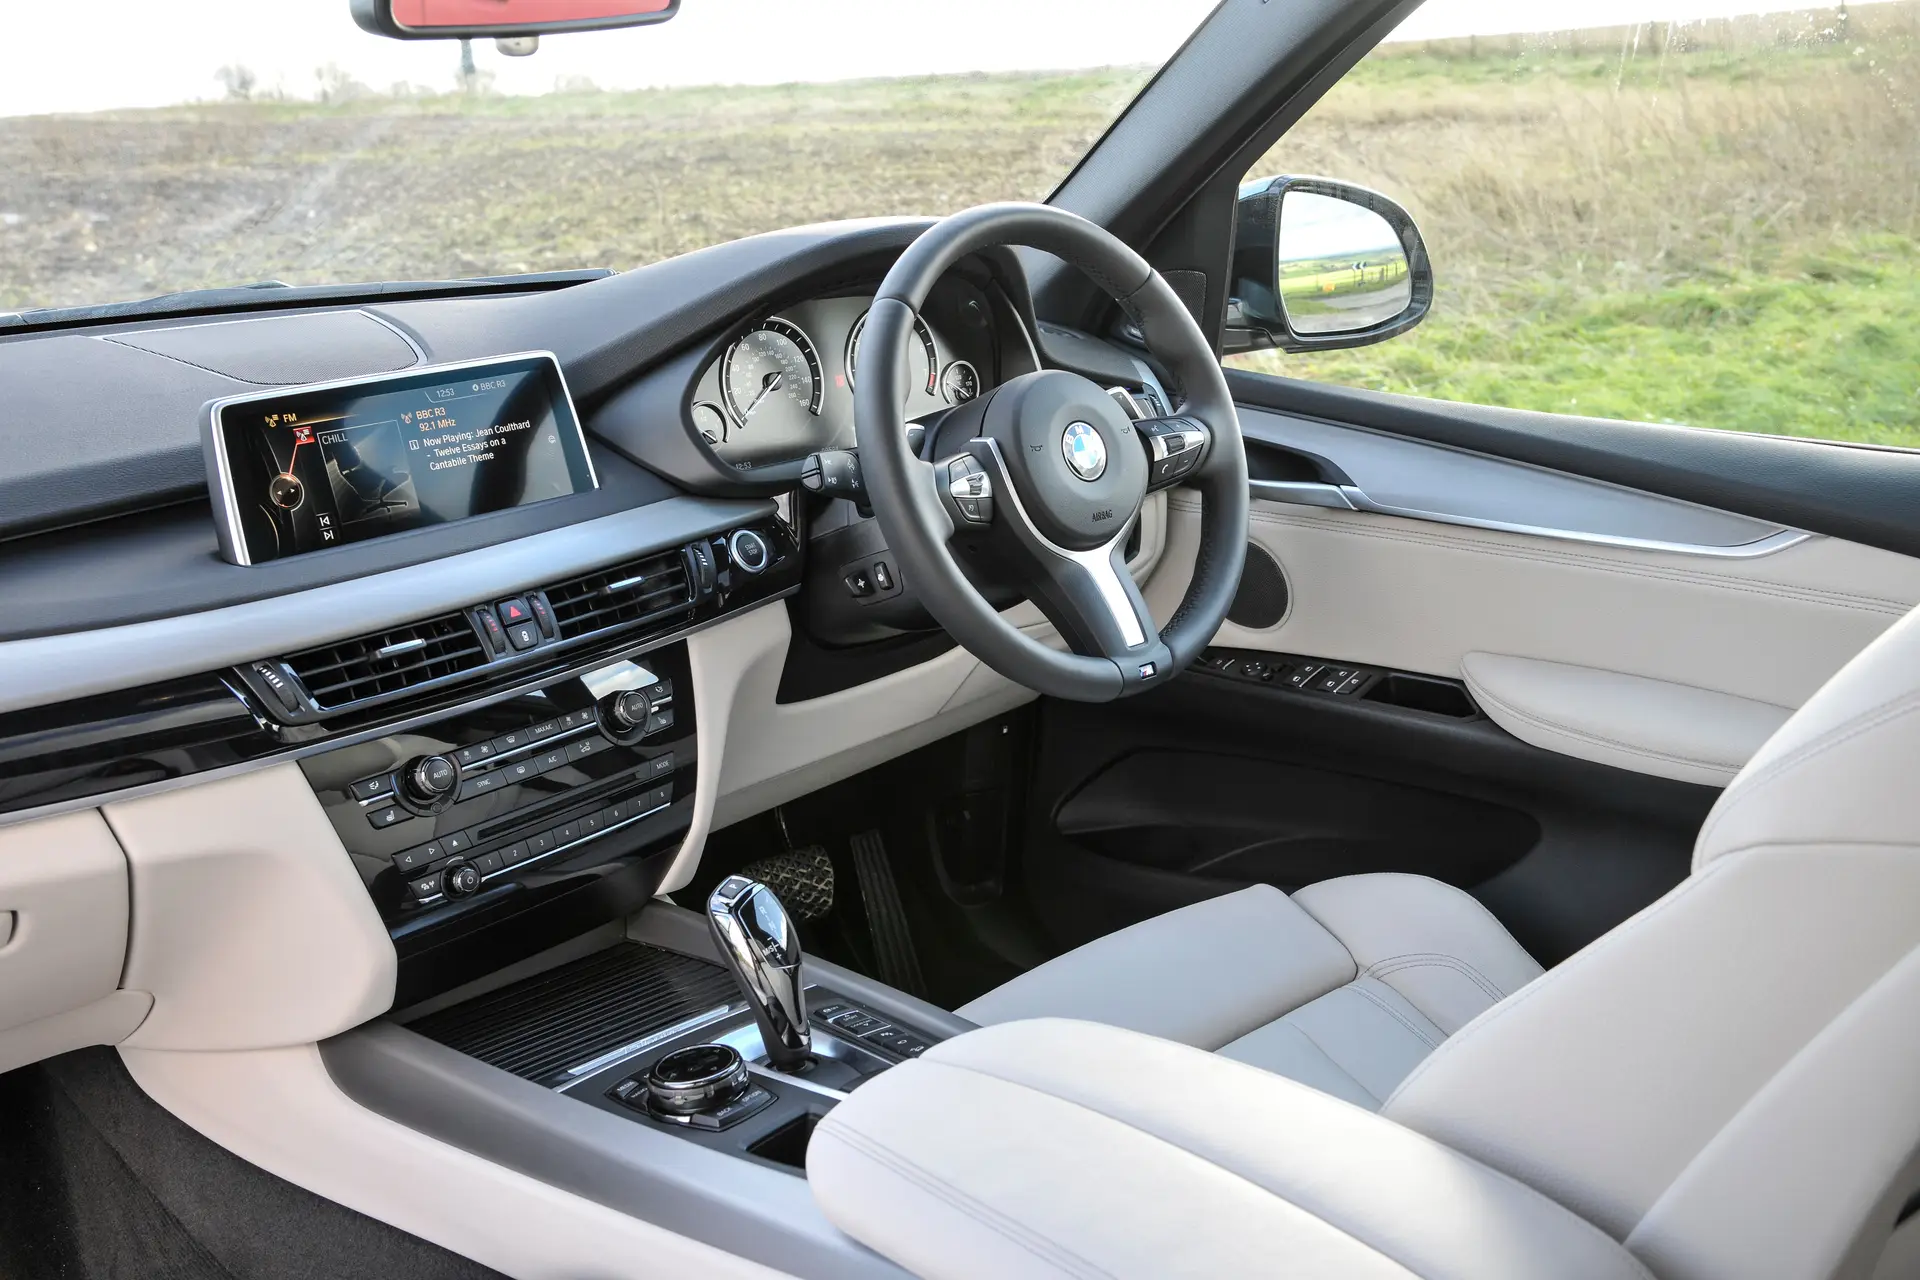 BMW X5 (2014-2018) Review:  Interior close up photo of the BMW X5 dashboard